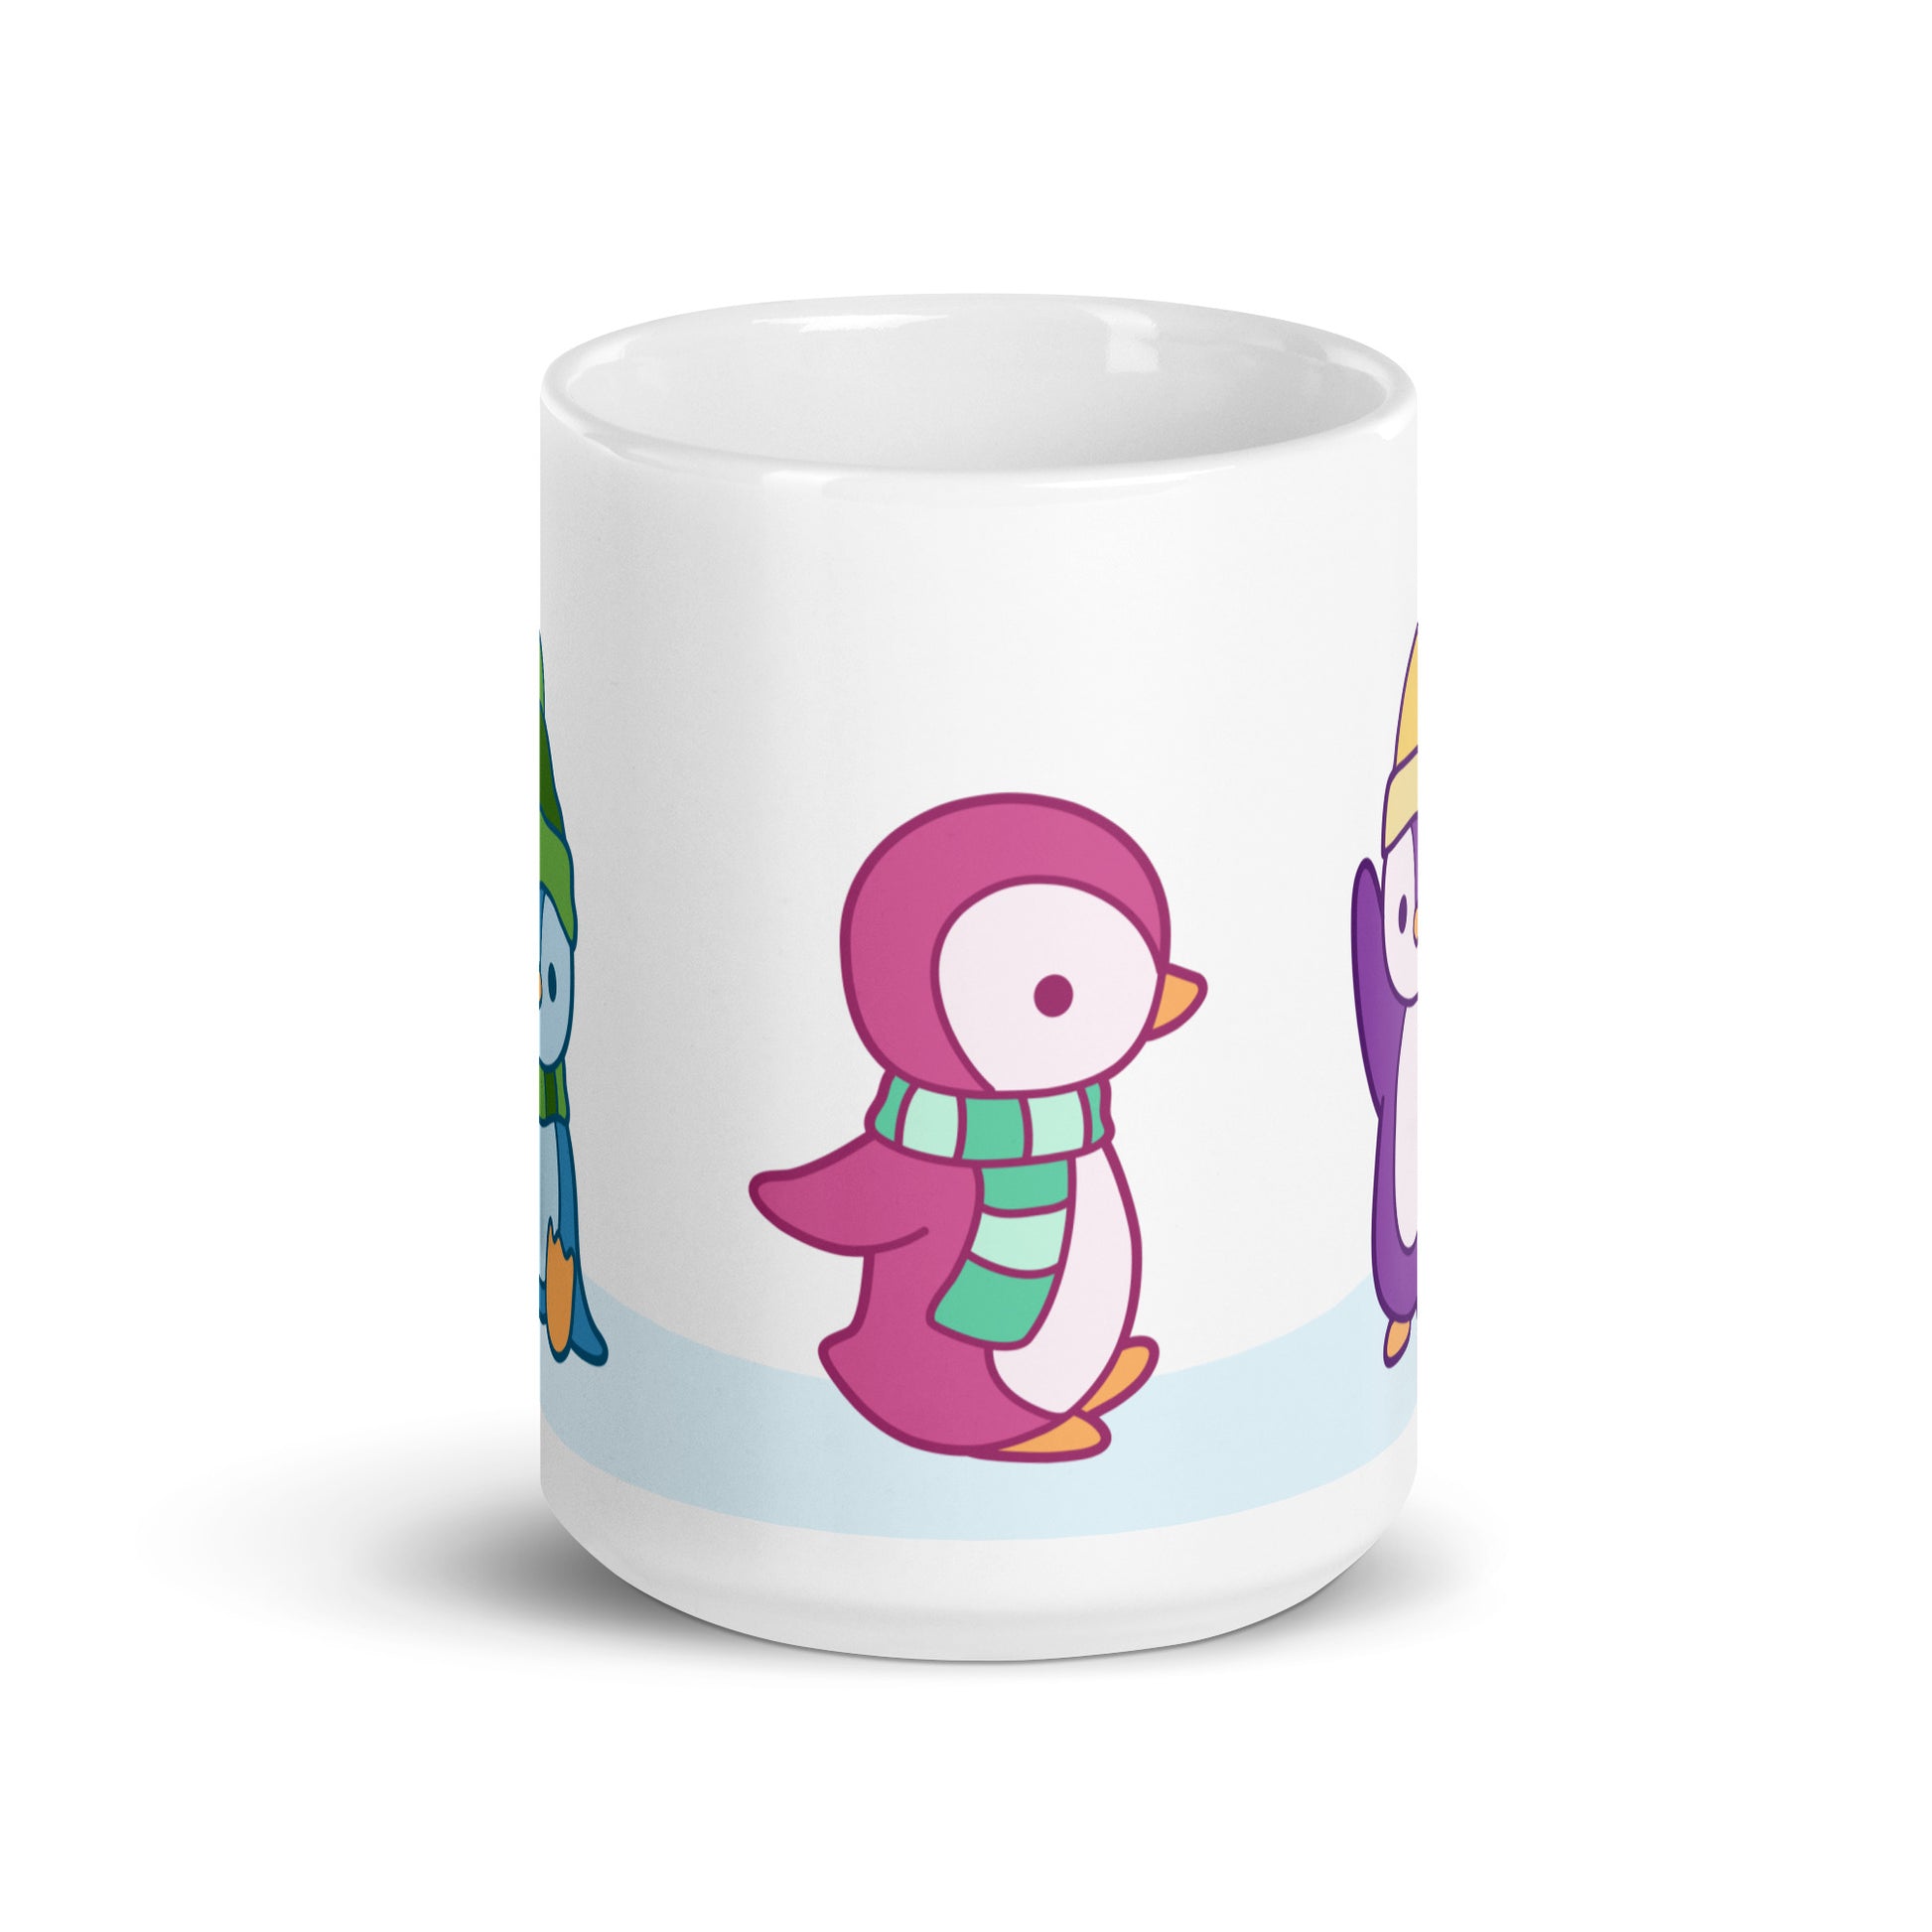 A white 15 ounce ceramic mug featuring an illustration of peguins in the snow. The primary visible penguin is pink, with a striped green scarf.